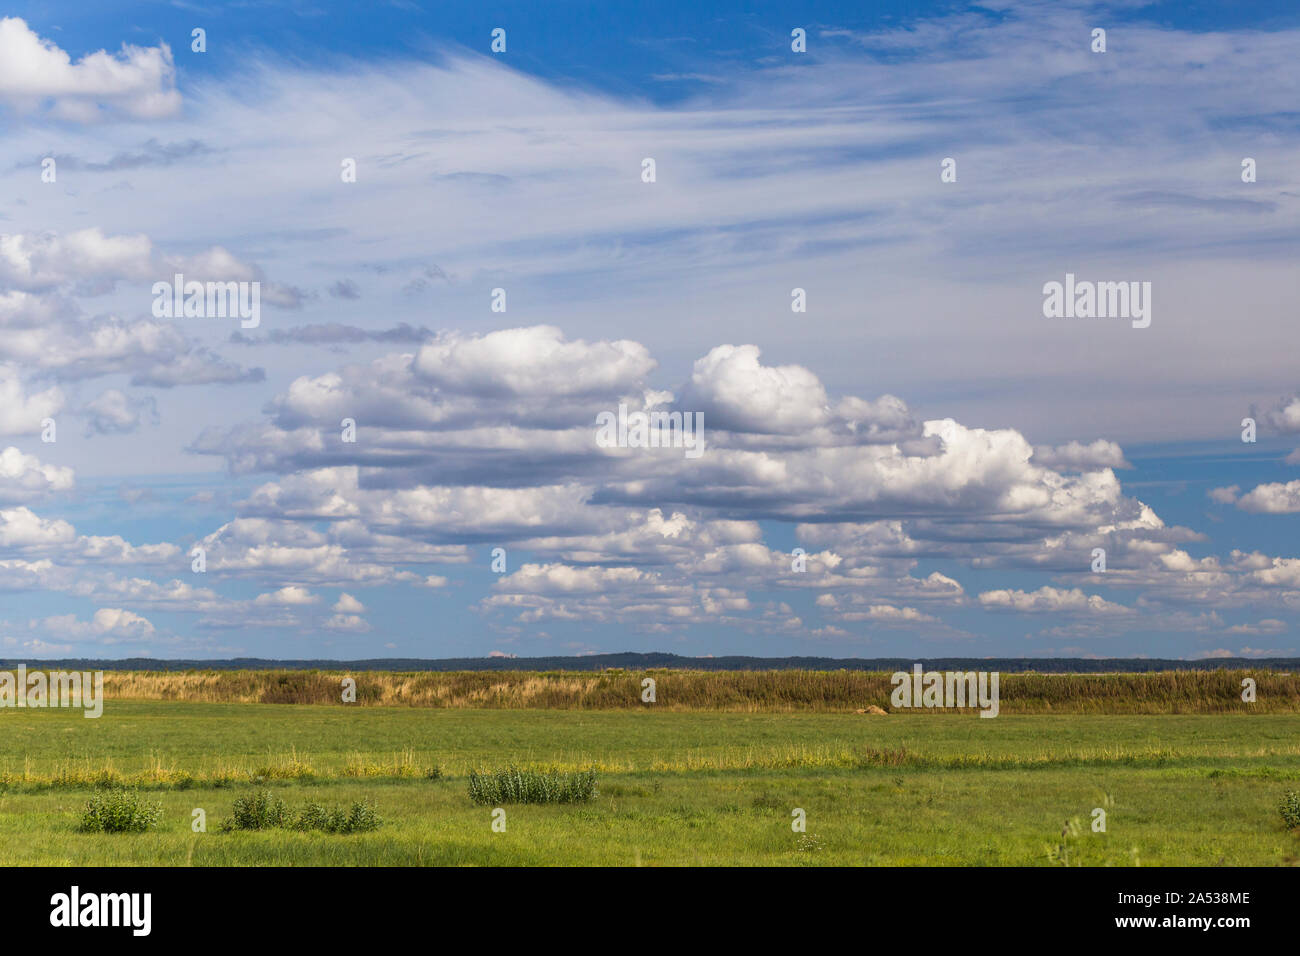 Green meadow and blue sky with fluffy clouds, summer time landscape view of Swedish countryside, Scandinavia. Stock Photo